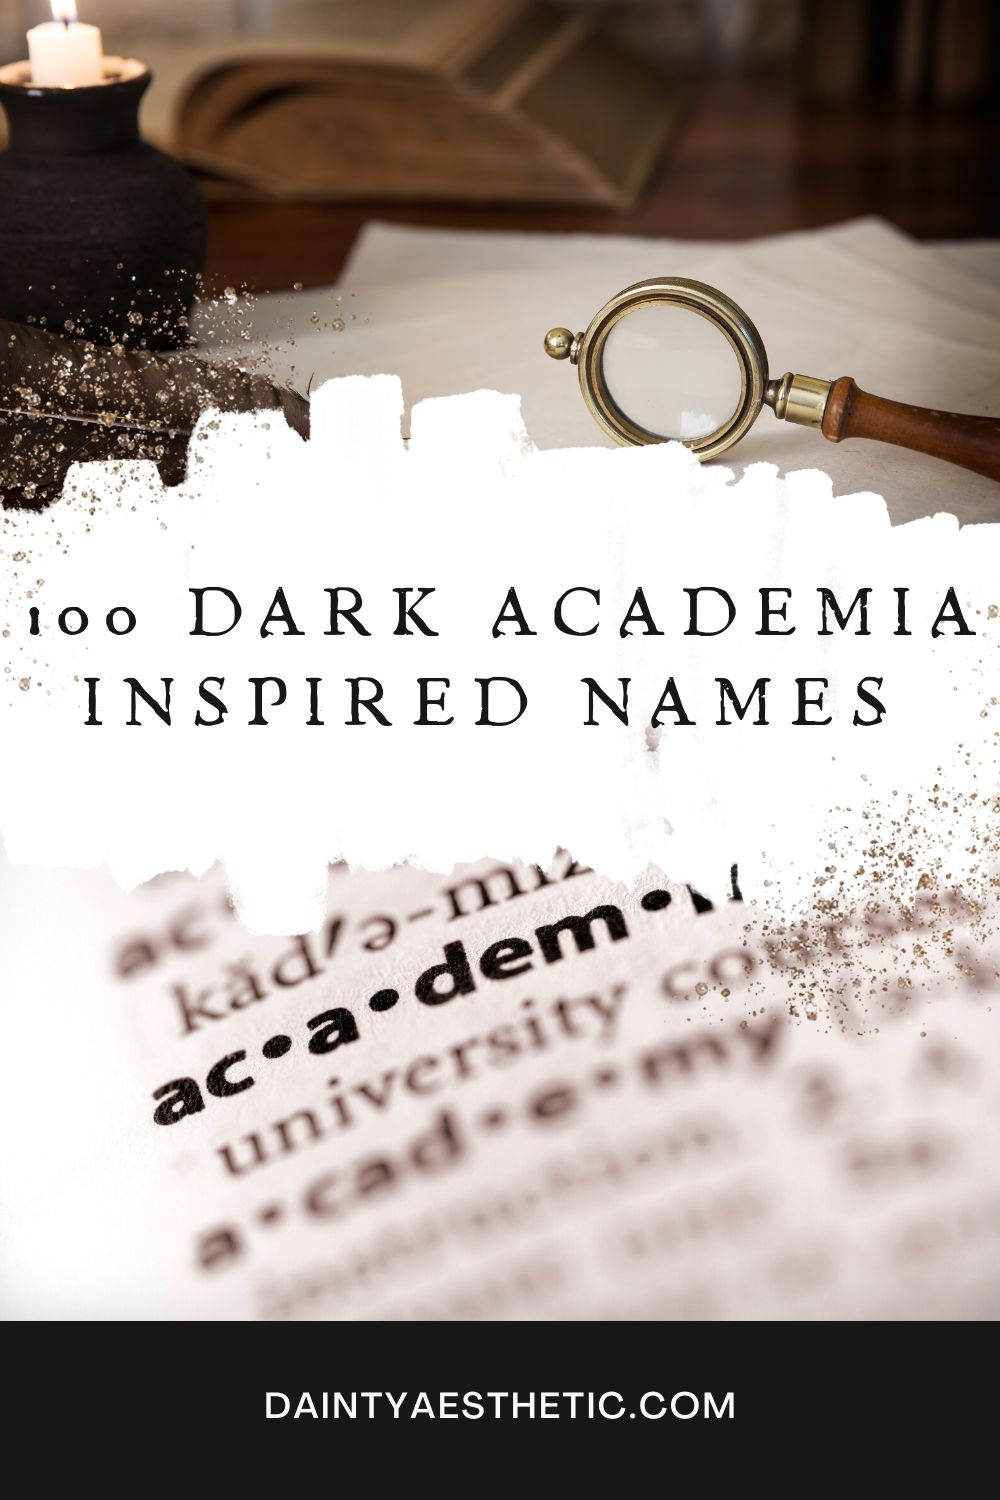 Dark Academia Inspired Names - title post